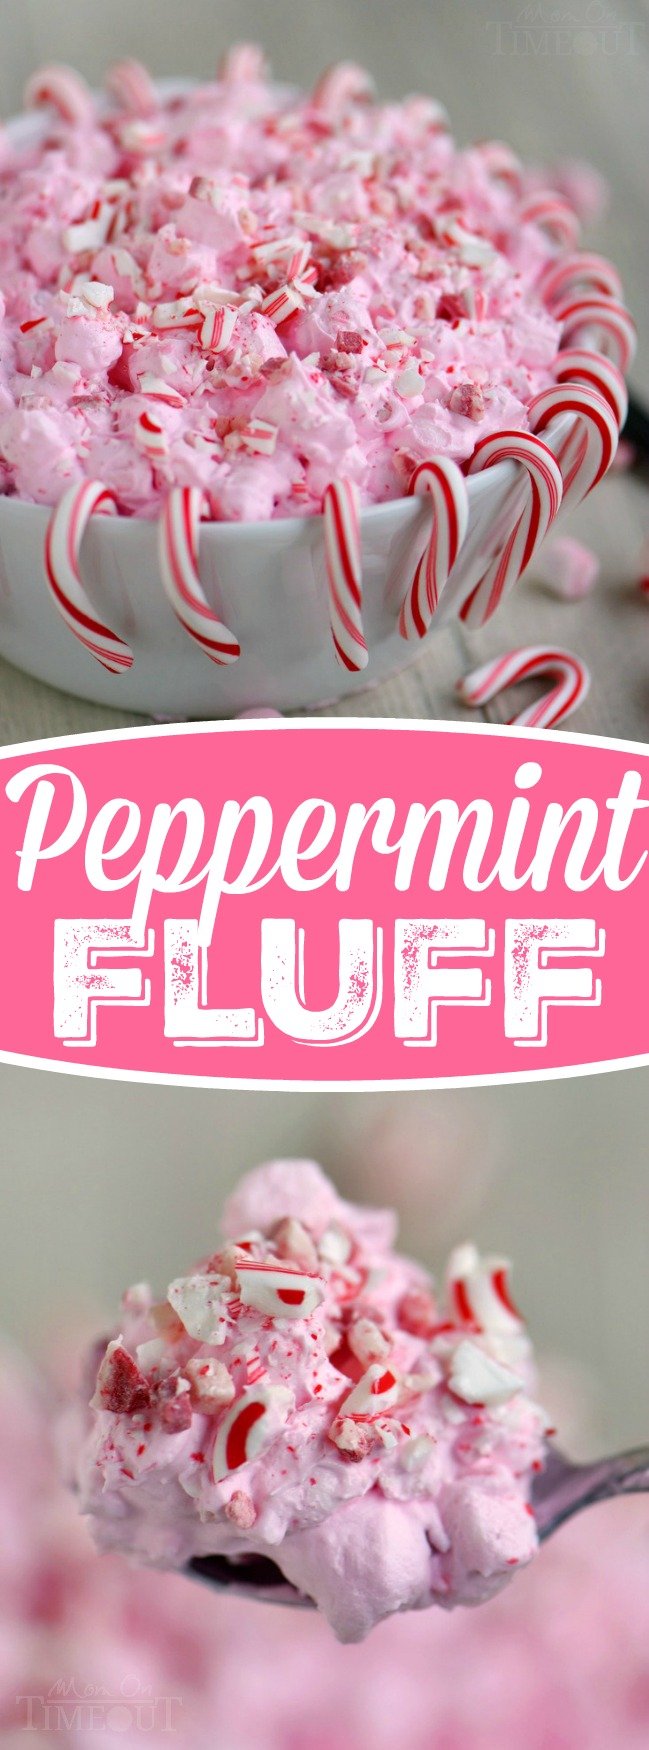 I've got the prettiest, two minute dessert you're going to make all holiday season long for you today! This Peppermint Fluff has just four ingredients and will disappear as quickly as you can make it. Double the recipe for a crowd!